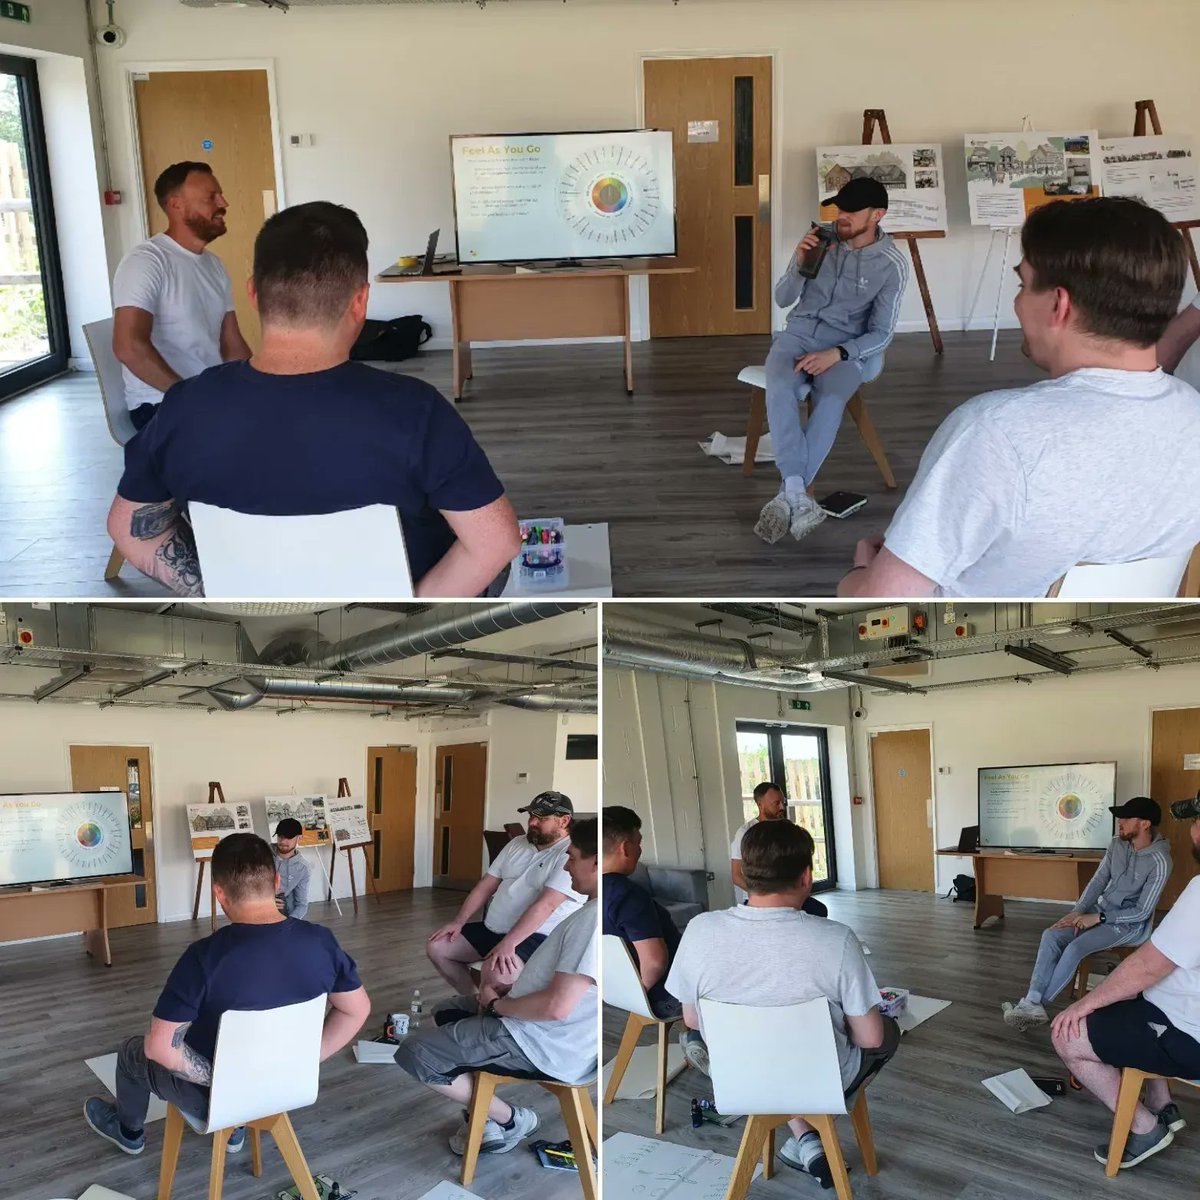 Good to see some of our #veterans taking part in the second part of their @mindsetpractice course last week - they found the focus on understanding ‘survival’ thinking and how to turn it into ‘growth’ particularly interesting. #WeAreEntrain